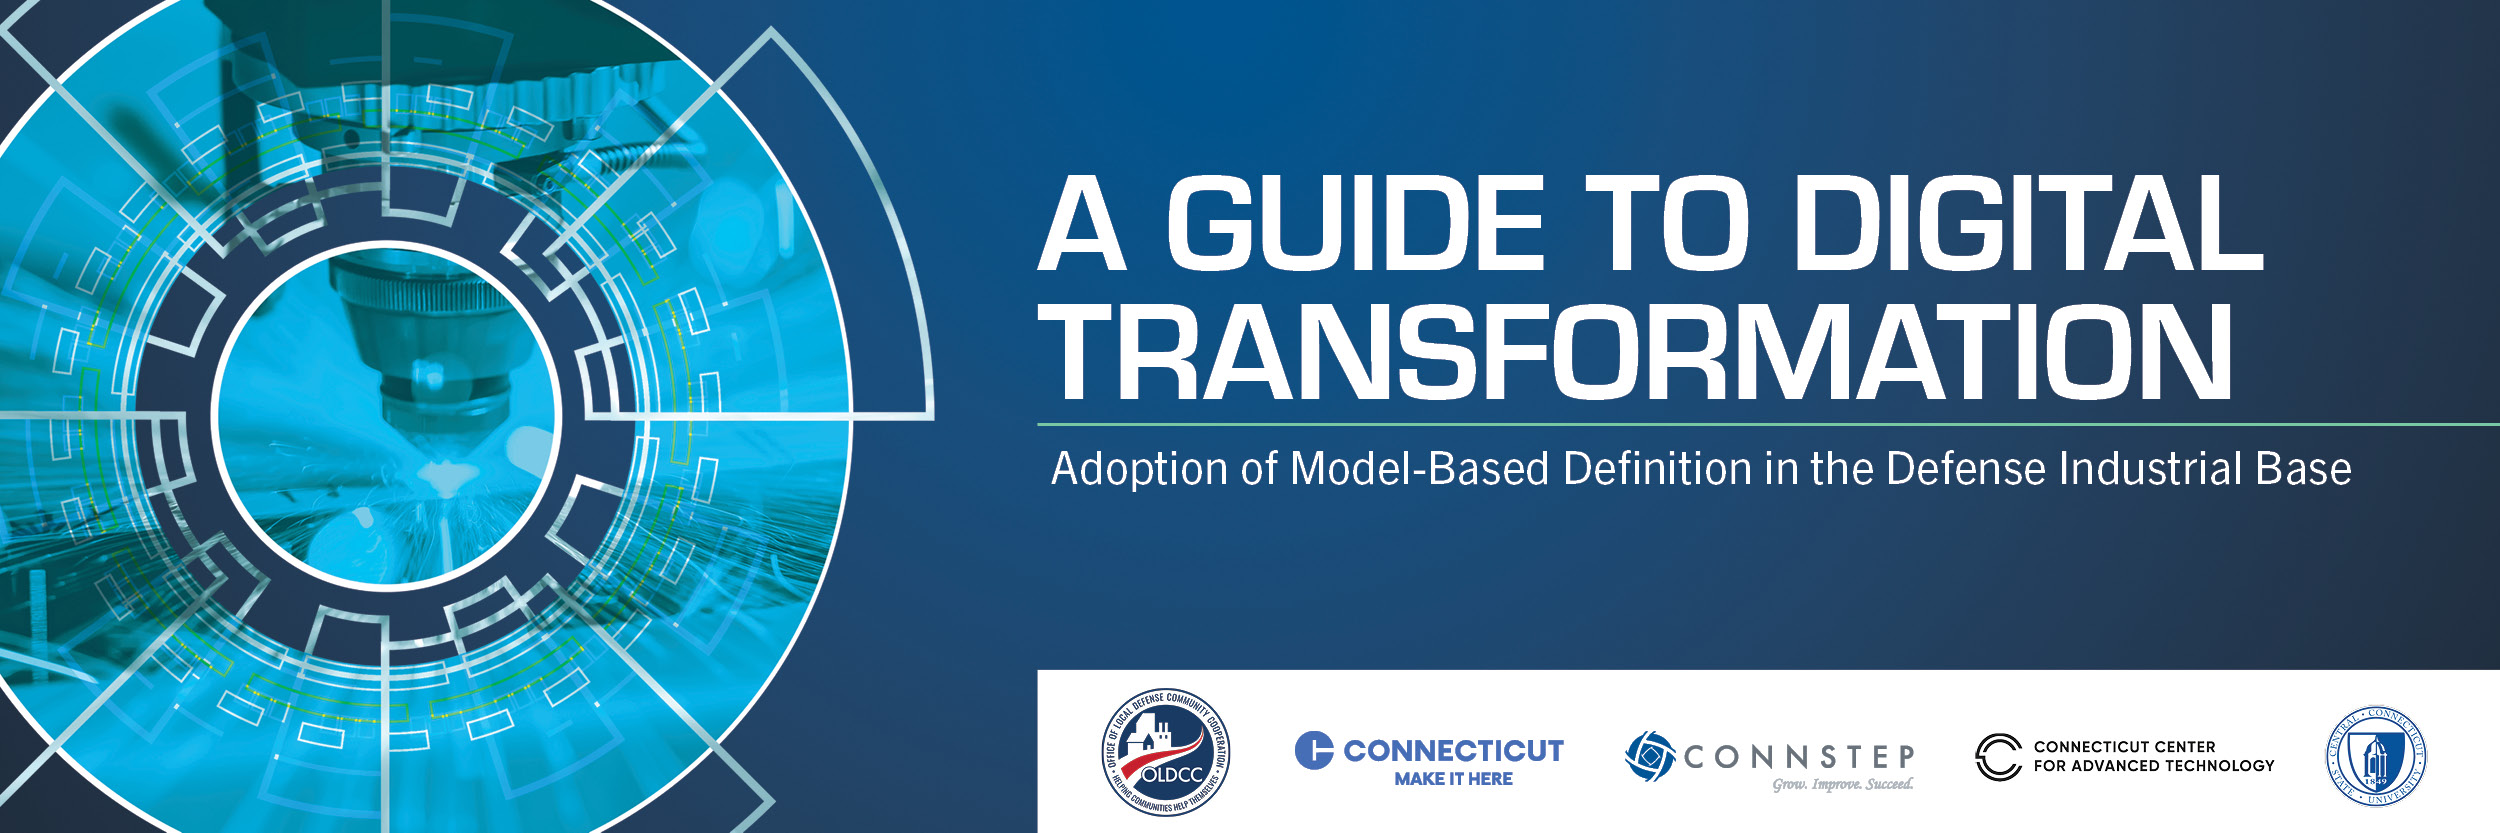 A Guide to Digital Transformation Hosted by CT State Community College Asnuntuck